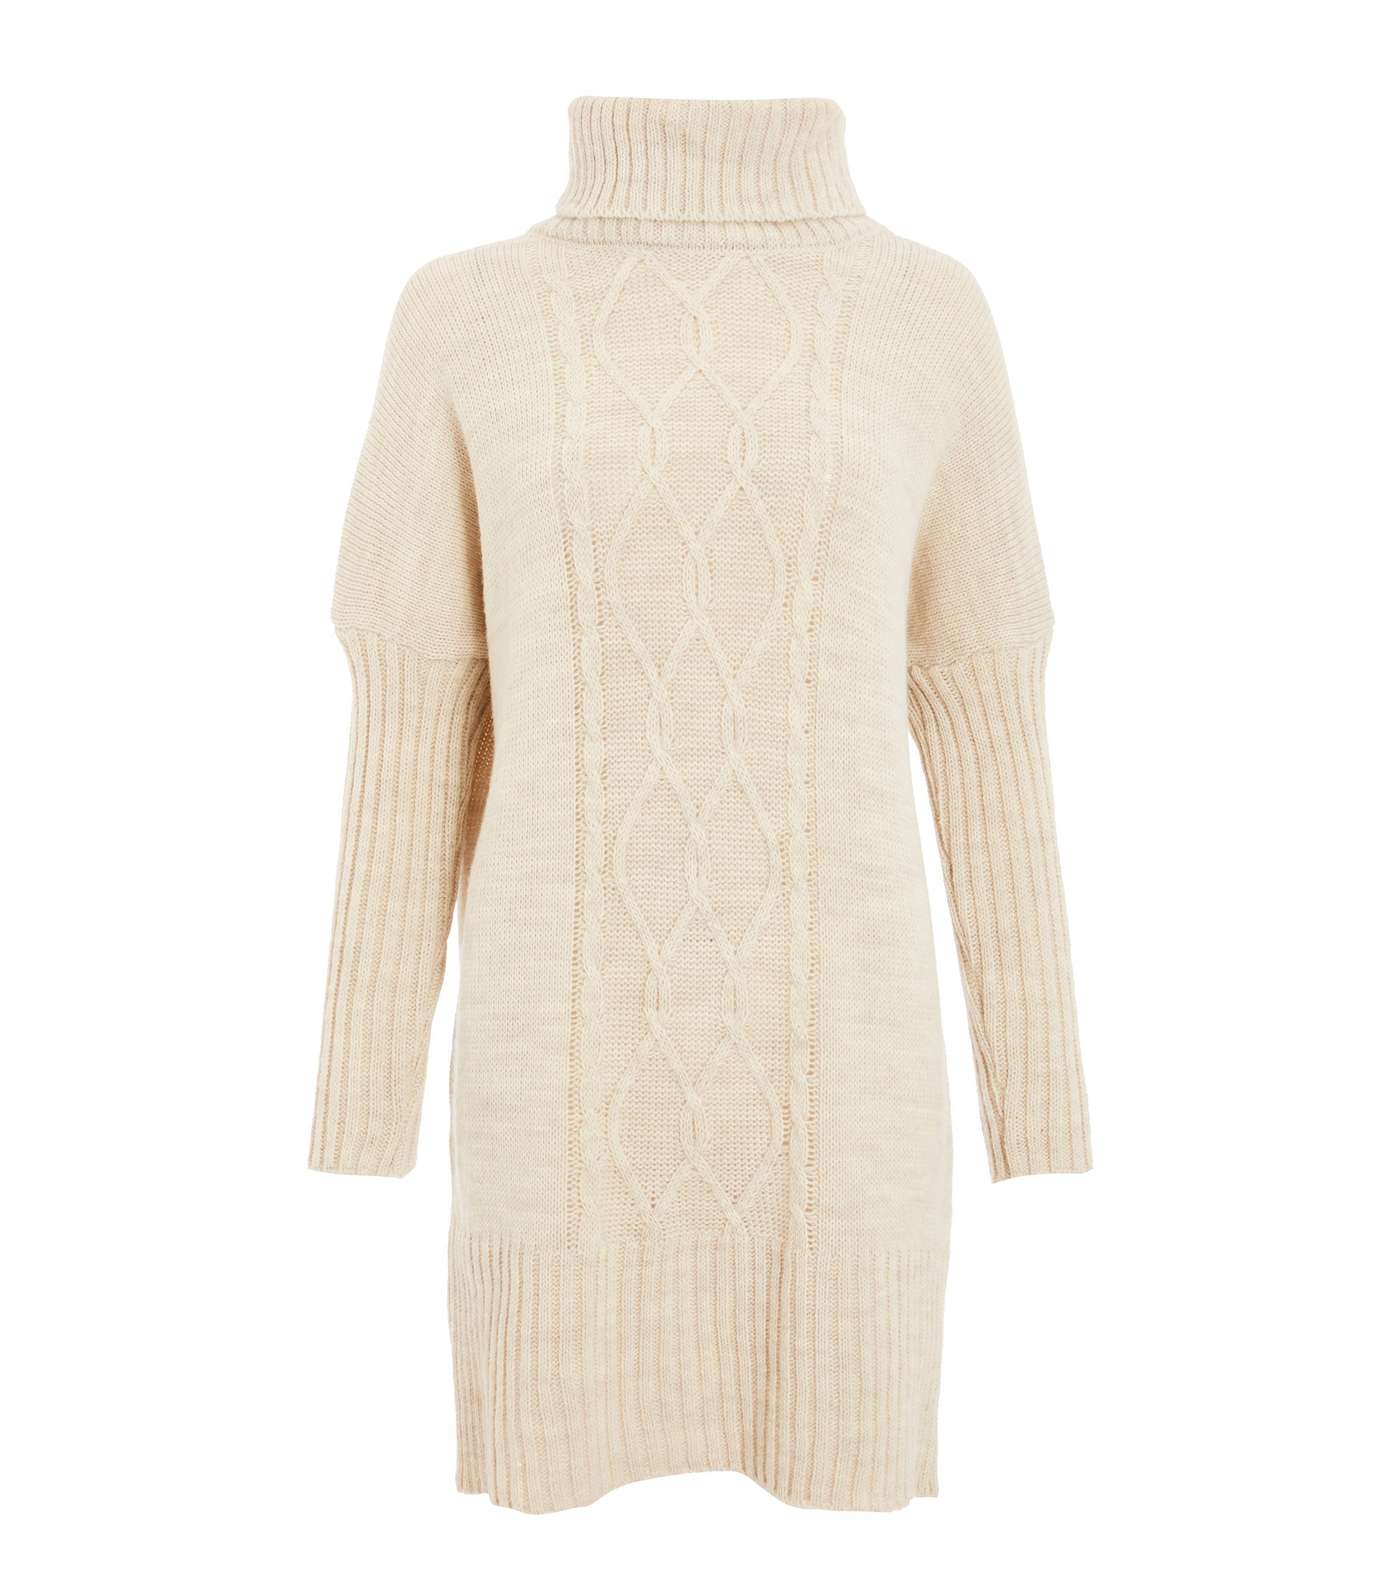 QUIZ Stone Cable Knit Roll Neck Jumper Dress Image 4